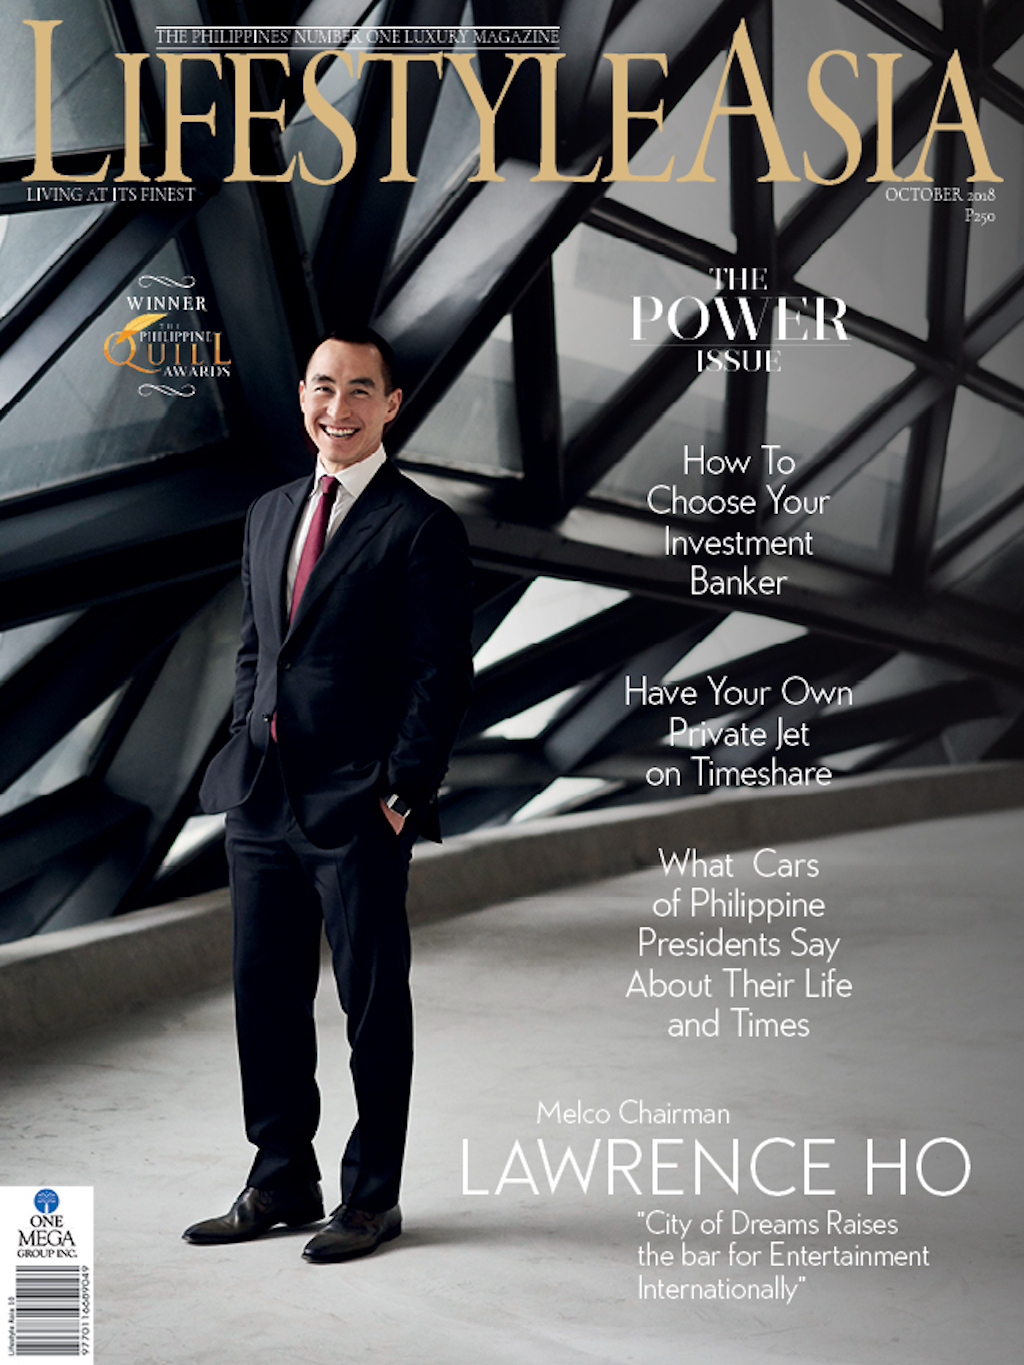 Lawrence Ho on the cover of Lifestyle Asia, October 2018 